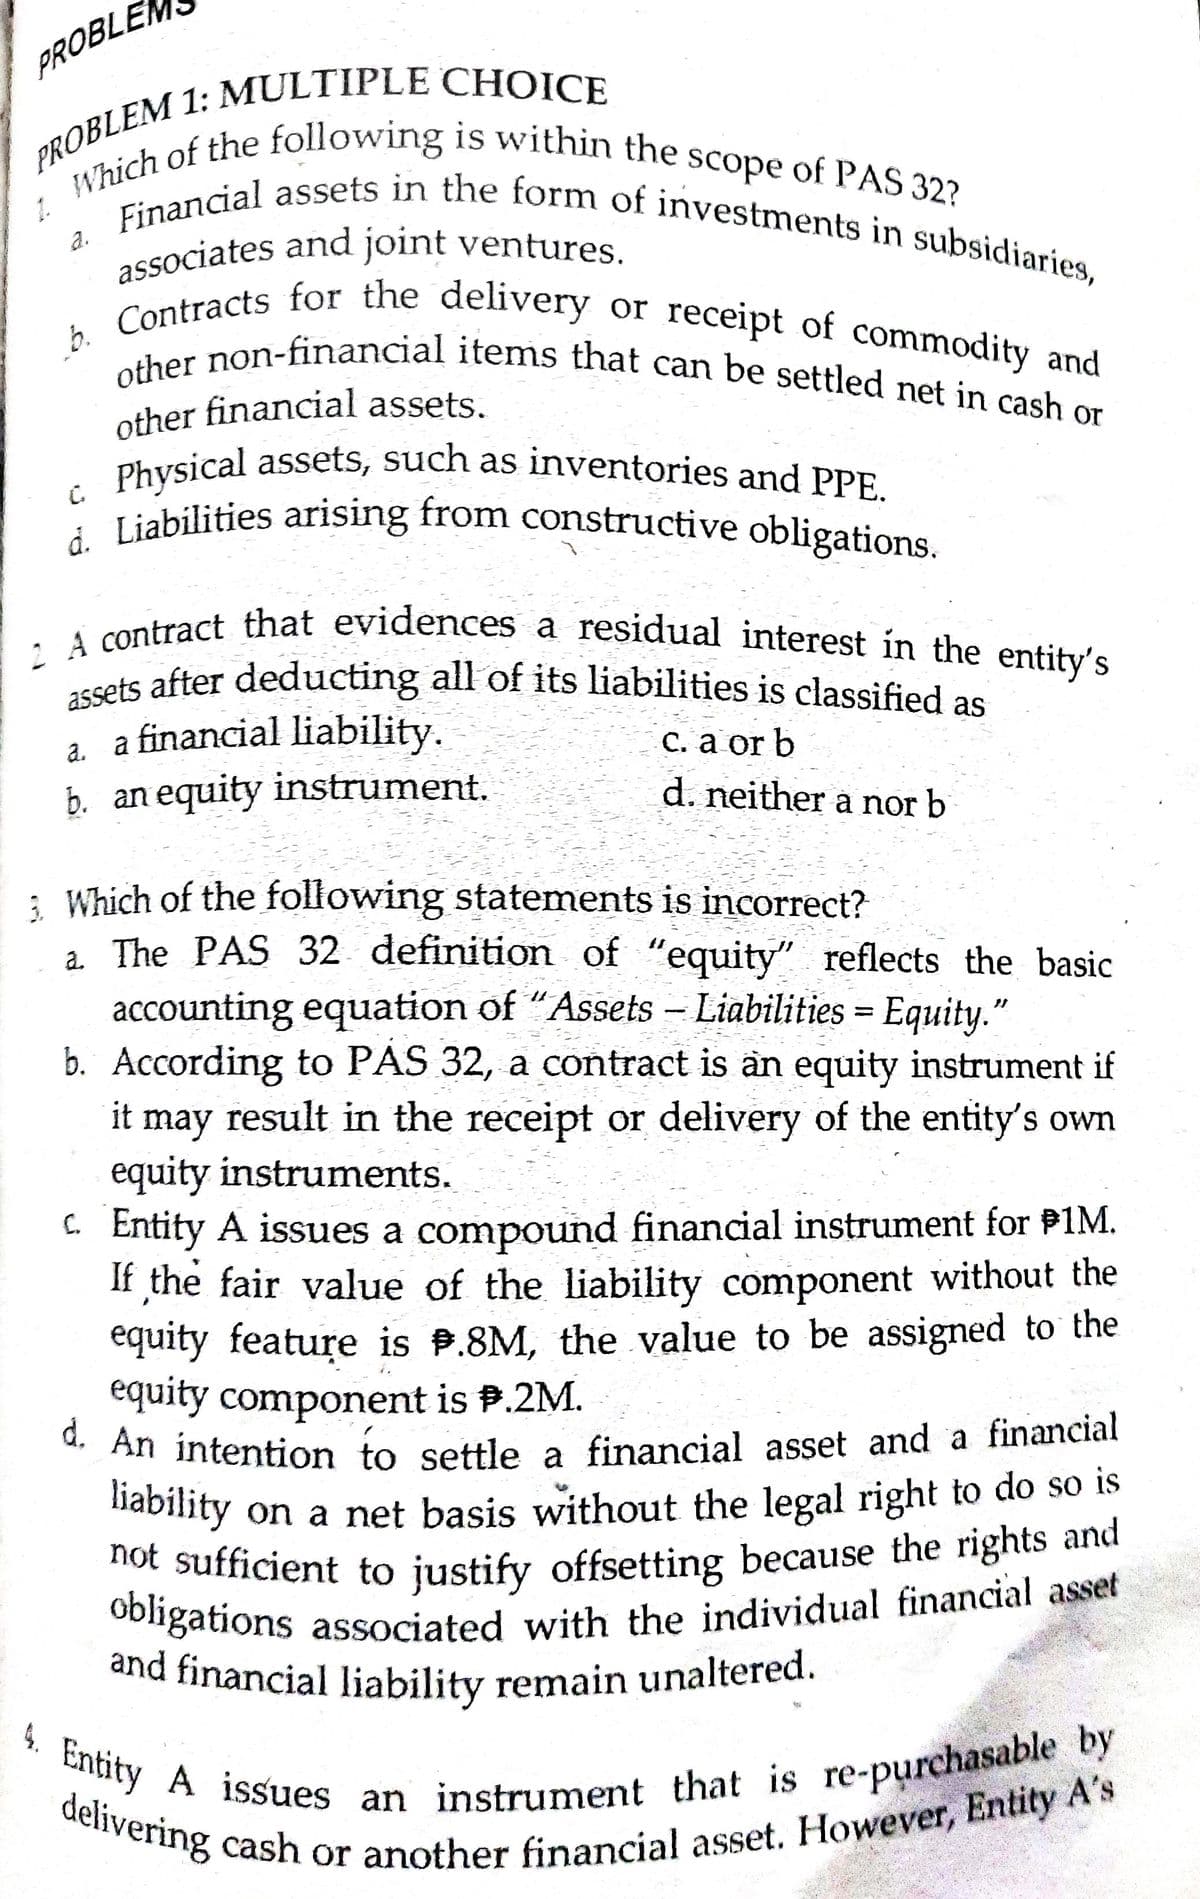 PROBLE
other financial assets.
associates and joint ventures.
delivering cash or another financial asset. However, Entity A's
not sufficient to justify offsetting because the rights and
d. An intention to settle a financial asset and a financial
2 A contract that evidences a residual interest in the entity's
assets after deducting all of its liabilities is classified as
4. Entity A issues an instrument that is re-purchasable by
d. Liabilities arising from constructive obligations.
Physical assets, such as inventories and PPE.
and financial liability remain unaltered.
Which of the following is within the scope of PAS 32?
b. Contracts for the delivery or receipt of commodity and
other non-financial items that can be settled net in cash or
Financial assets in the form of investments in subsidiaries,
1.
a.
b.
Co non-financial items that can be settled net in cash or
Physical assets, such as inventories and PPE
C.
ssets after deducting all of its liabilities is classified as
a. a financial liability.
b. an equity instrument.
С. а or b
d. neither a nor b
: Which of the following statements is incorrect?
a. The PAS 32 definition of "equity" reflects the basic
accounting equation of "Assets – Liabilities = Equity."
b. According to PAS 32, a contract is an equity instrument if
|
it may result in the receipt or delivery of the entity's own
equity instruments.
C. Entity A issues a compound financial instrument for P1M.
If the fair value of the liability component without the
equity feature is P.8M, the value to be assigned to the
equity component is P.2M.
* An intention to settle a financial asset and a financial
nability on a net basis without the legal right to do so is
hot sufficient to justify offsetting because the rights and
Oongations associated with the individual financial asset
and financial liability remain unaltered.
Cntity A issues an instrument uhat
re-purchasable by
